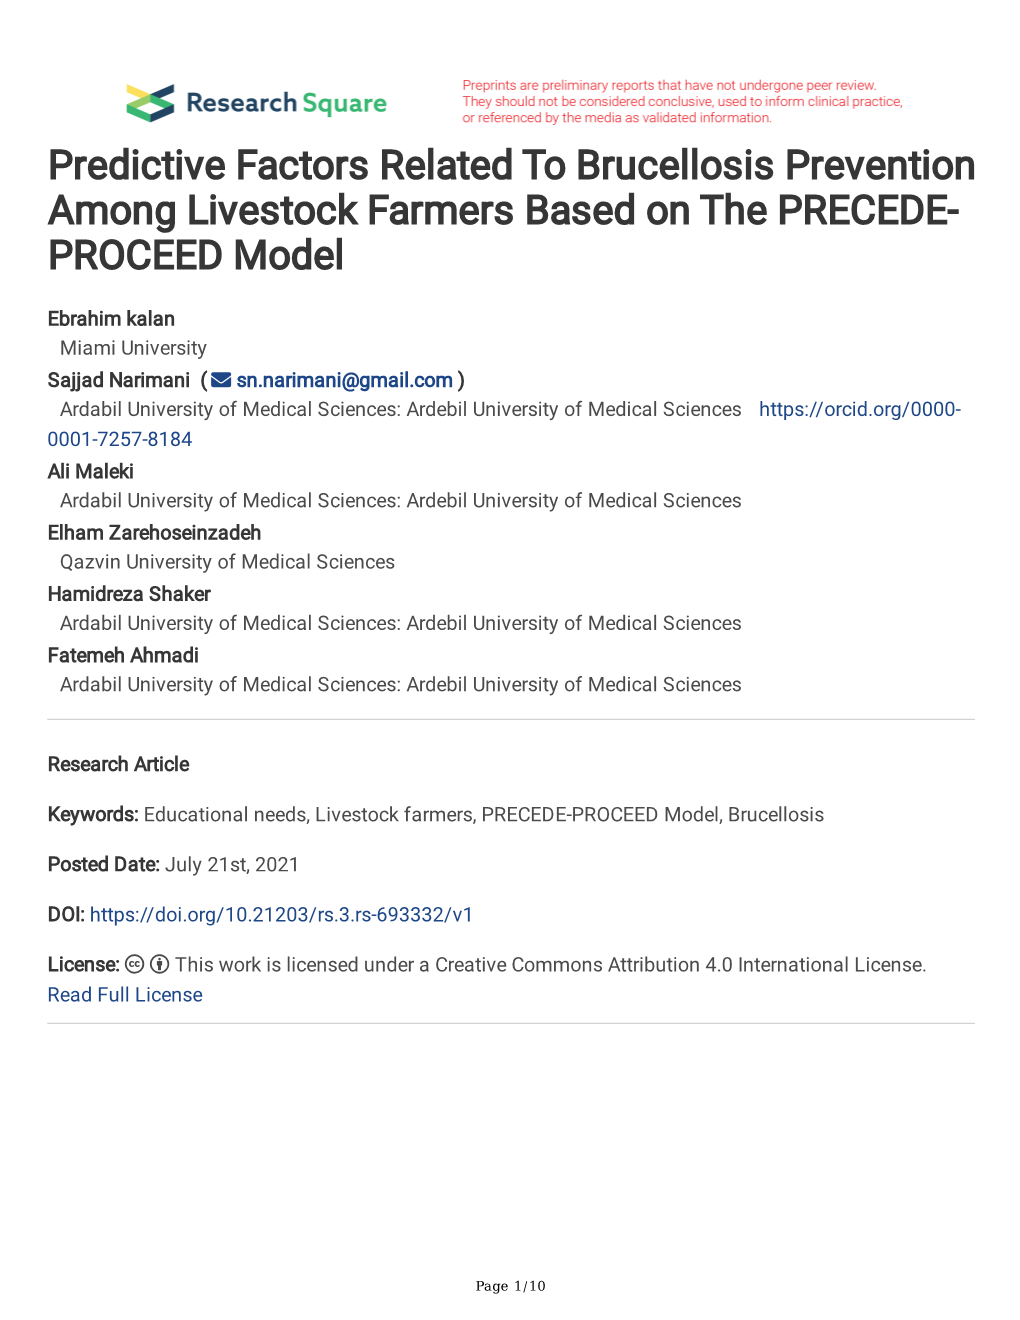 Predictive Factors Related to Brucellosis Prevention Among Livestock Farmers Based on the PRECEDE- PROCEED Model